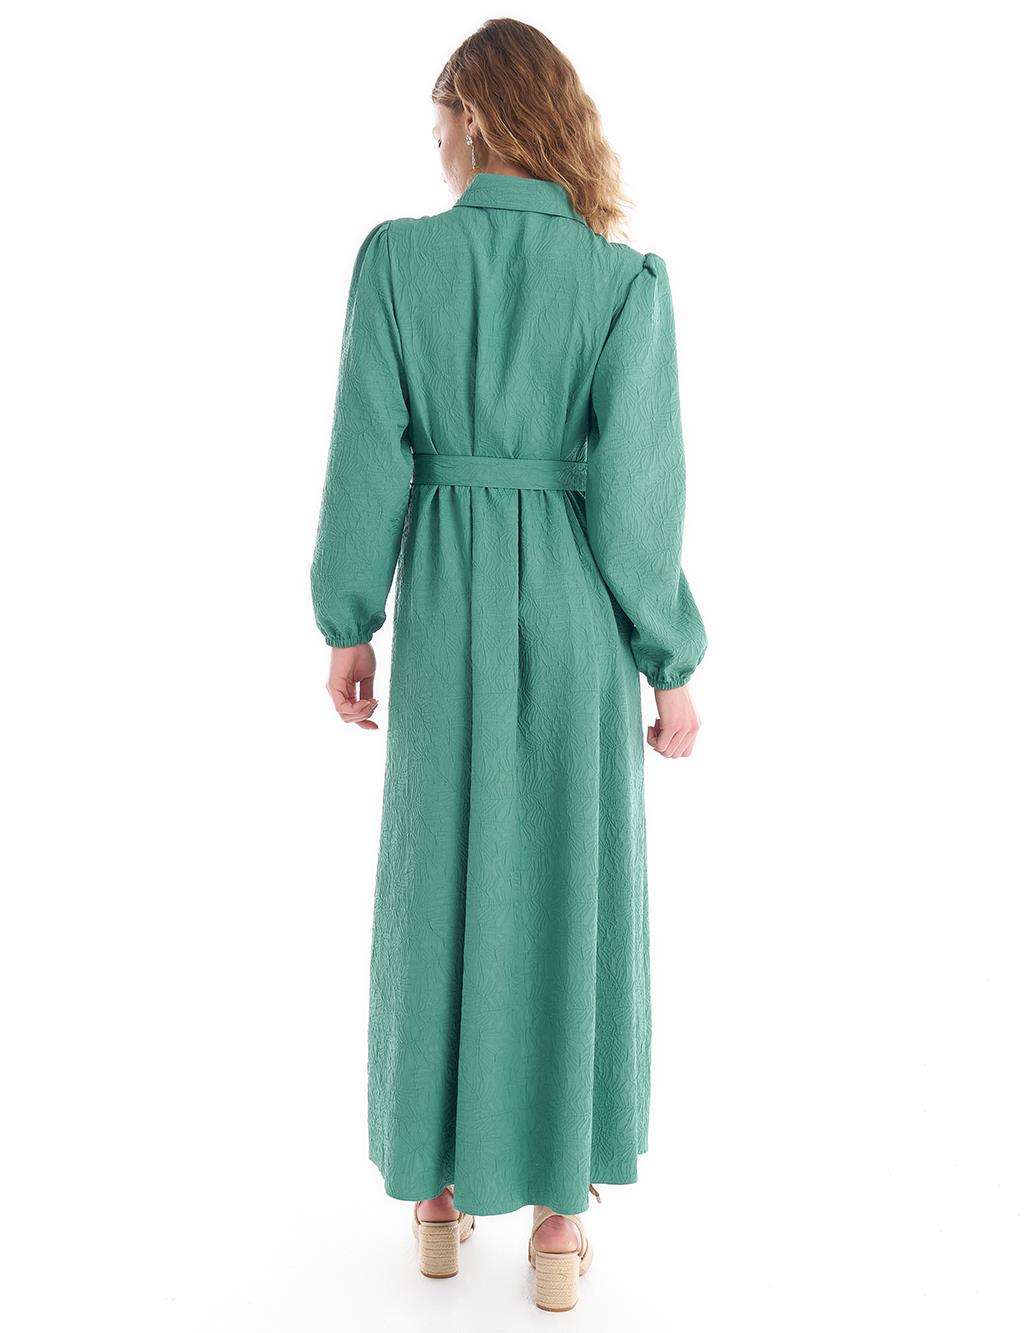 Stone Embroidered Collar Dress Lake Green